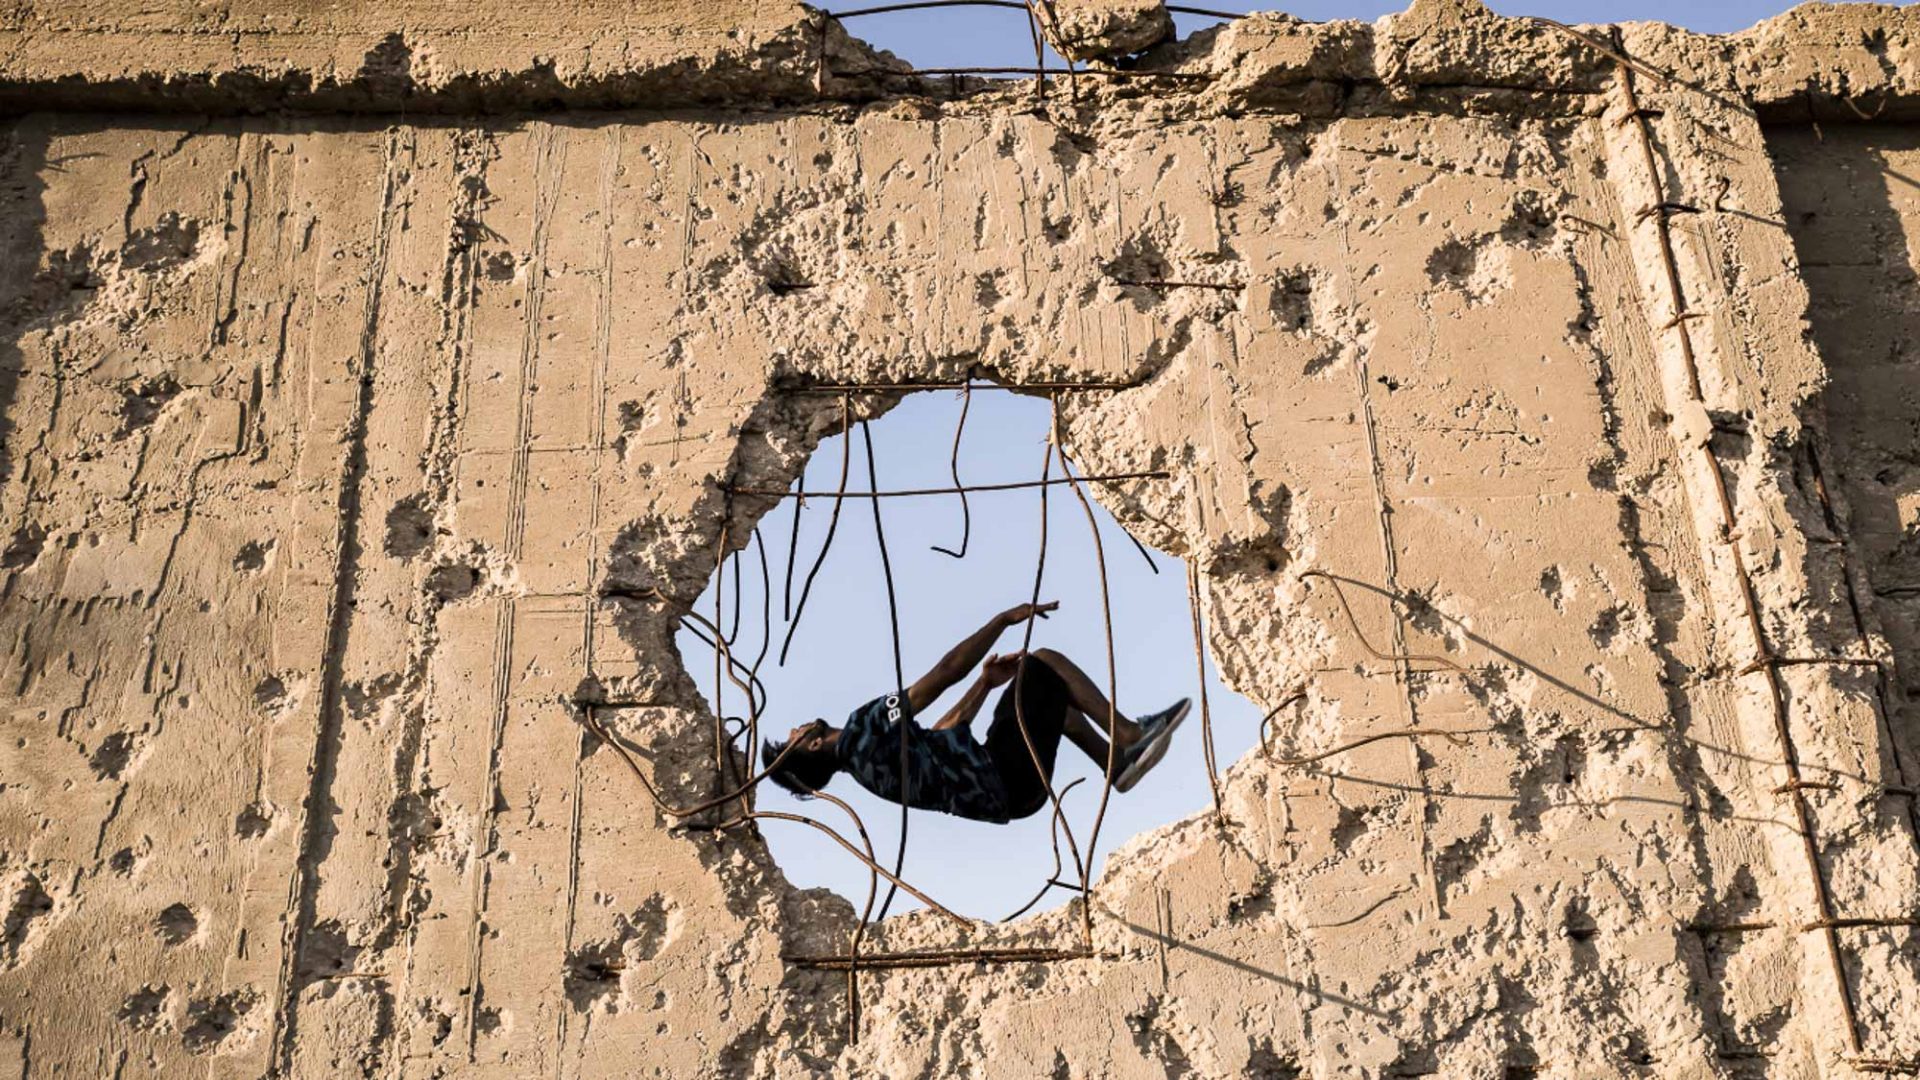 In photos: How sport and creativity is giving Gaza’s youth a vital release